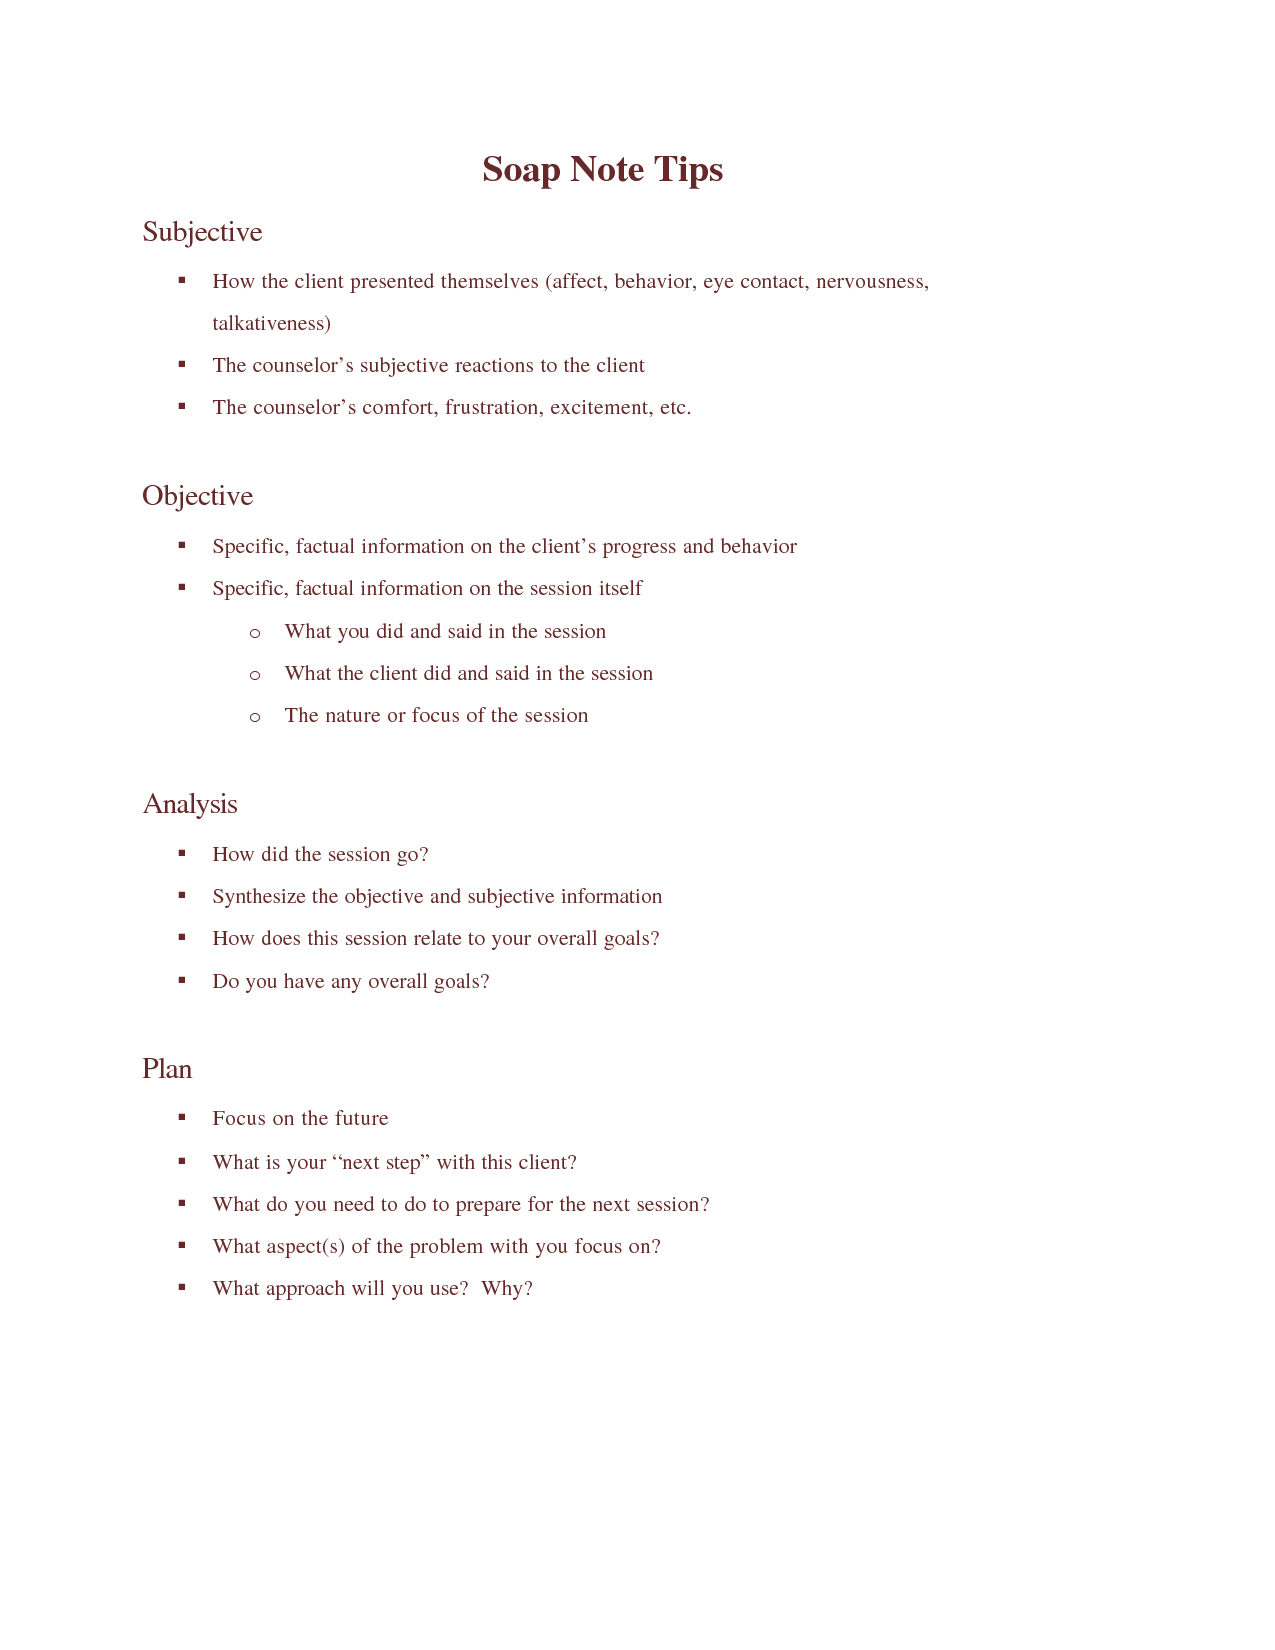 Sample Soap Note Template For Counseling | Soap Note, Notes In Soap Report Template